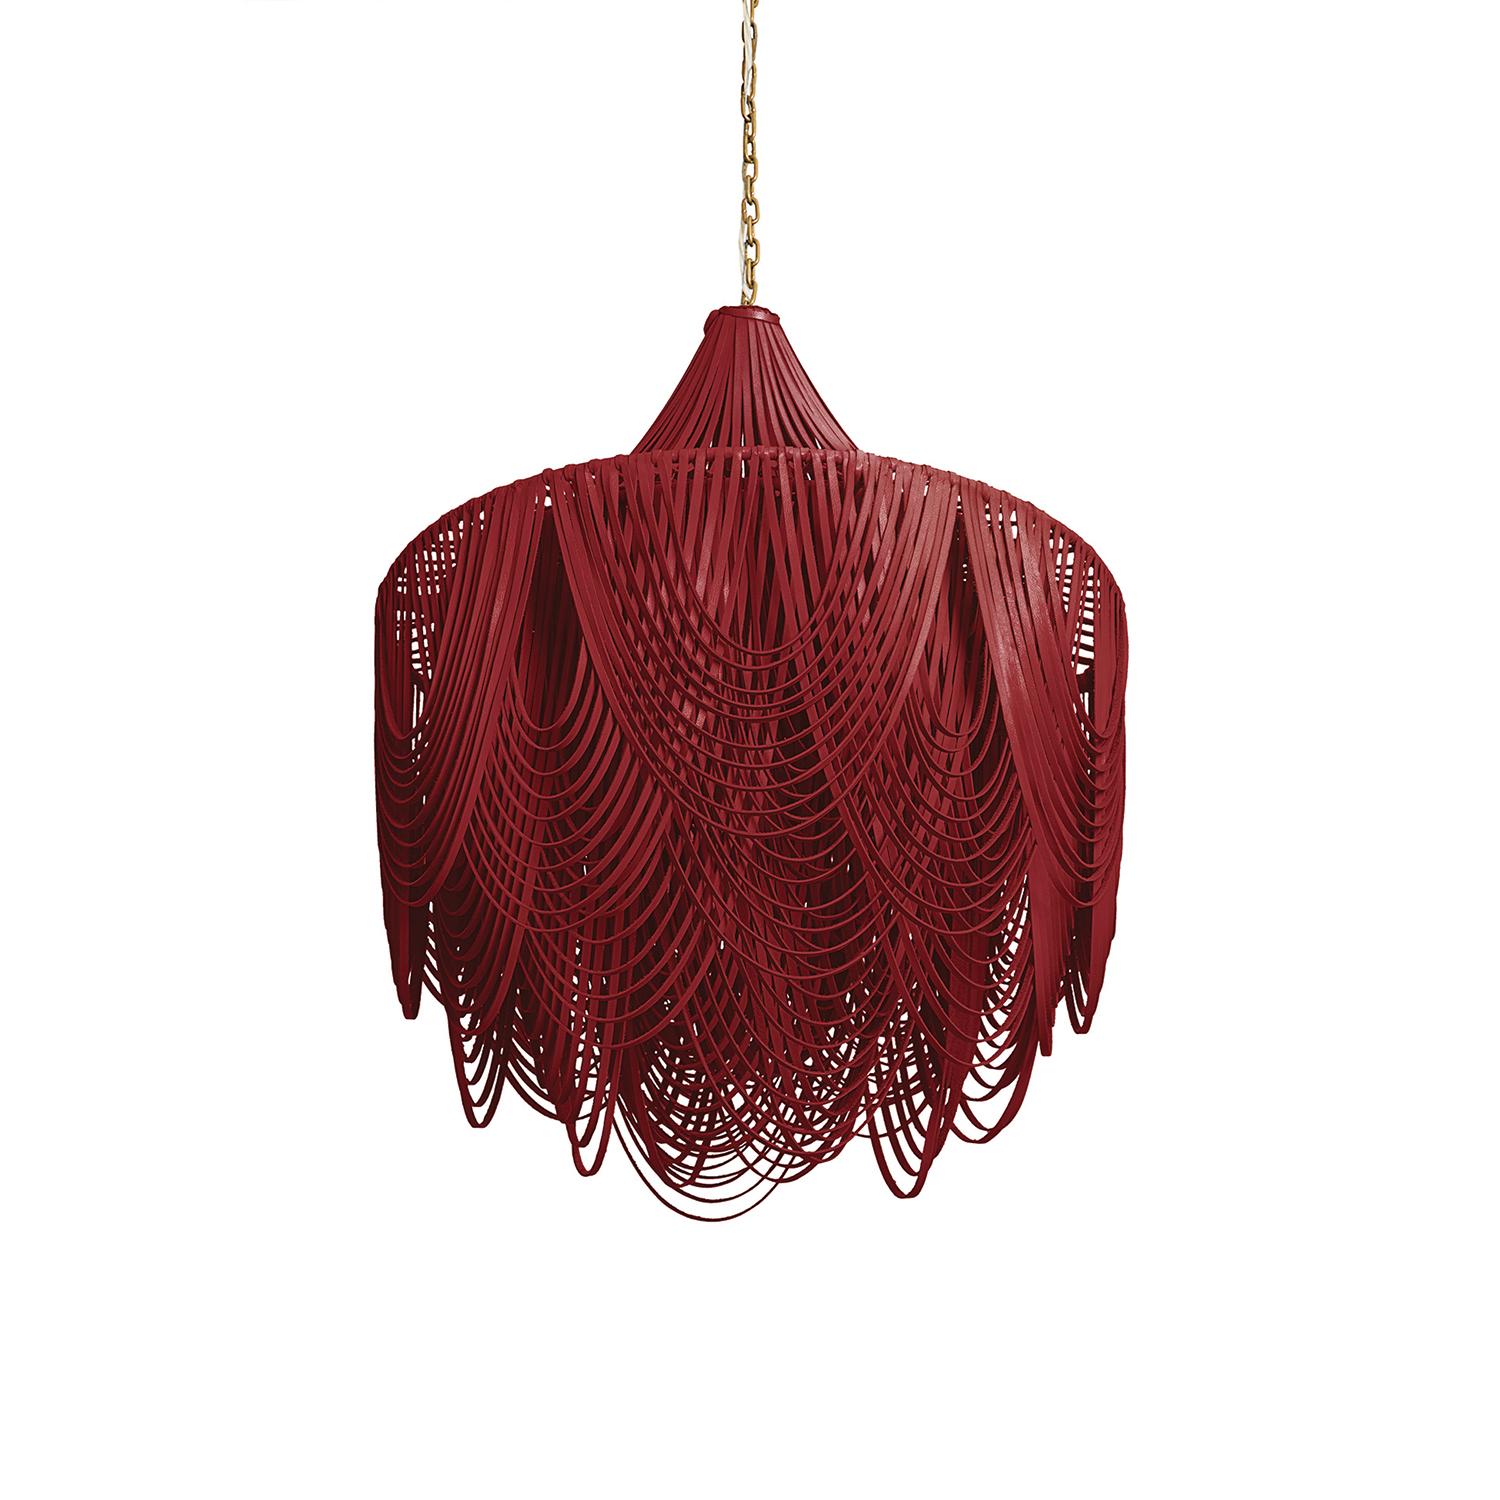 Medium Round Whisper with Crown Leather Chandelier in NeKeia Leather